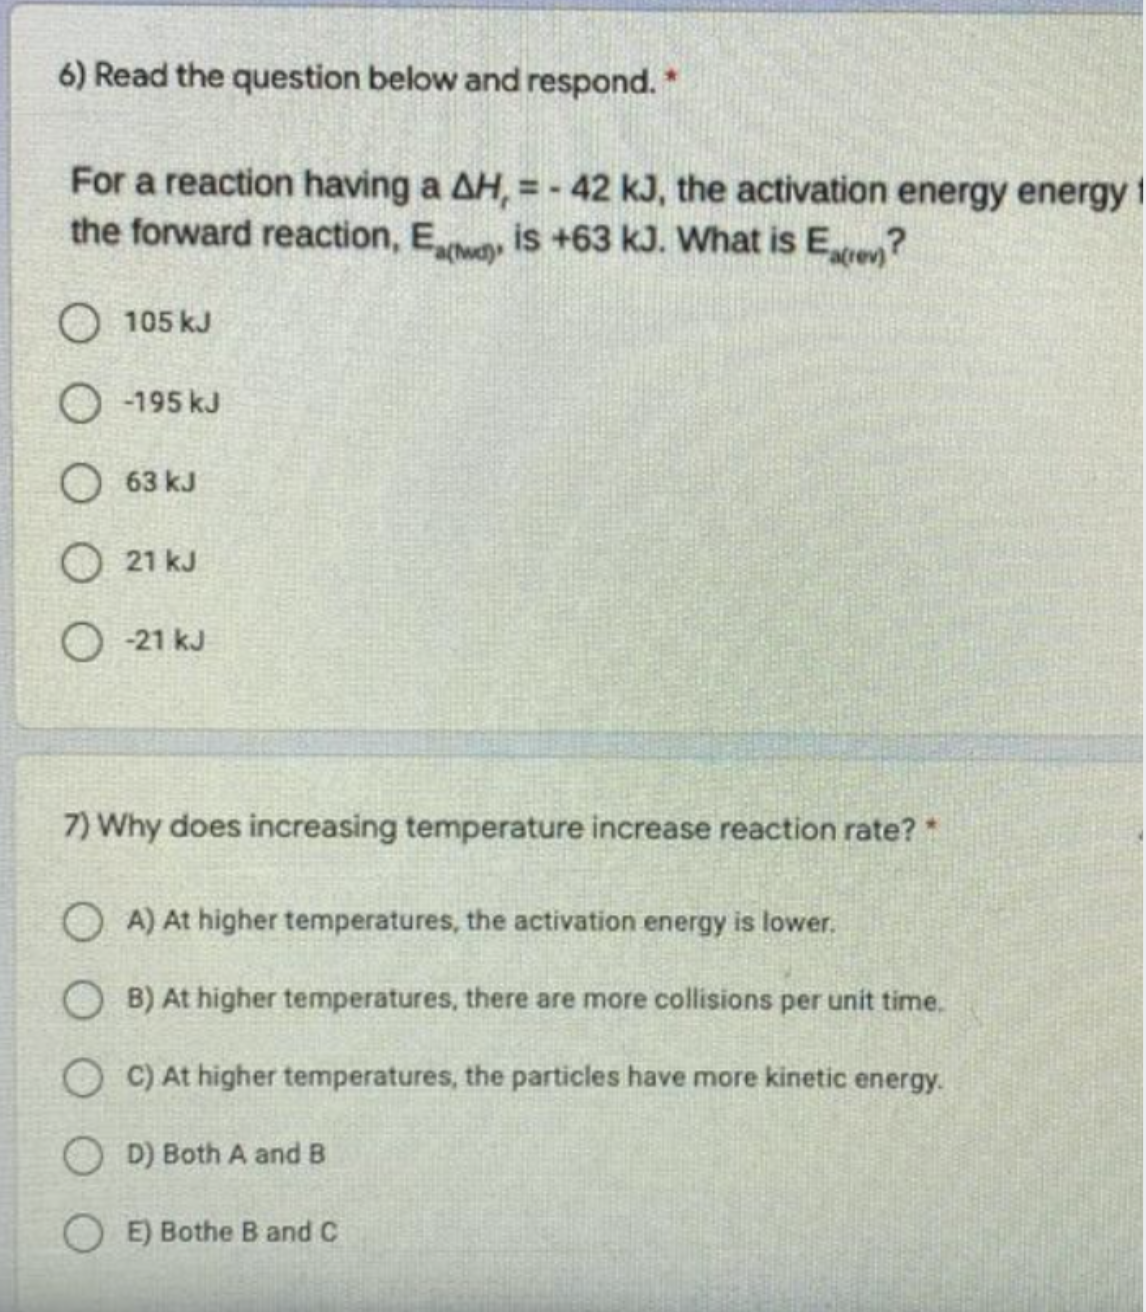 6) Read the question below and respond. *
For a reaction having a AH, = - 42 kJ, the activation energy energy 1
the forward reaction, Ewa
is +63 kJ. What is Ee?
O 105 kJ
O -195 kJ
O 63 kJ
O 21 kJ
O - 21 kJ
7) Why does increasing temperature increase reaction rate?*
O A) At higher temperatures, the activation energy is lower.
B) At higher temperatures, there are more collisions per unit time.
O C) At higher temperatures, the particles have more kinetic energy.
OD) Both A and B
OE) Bothe B and C
